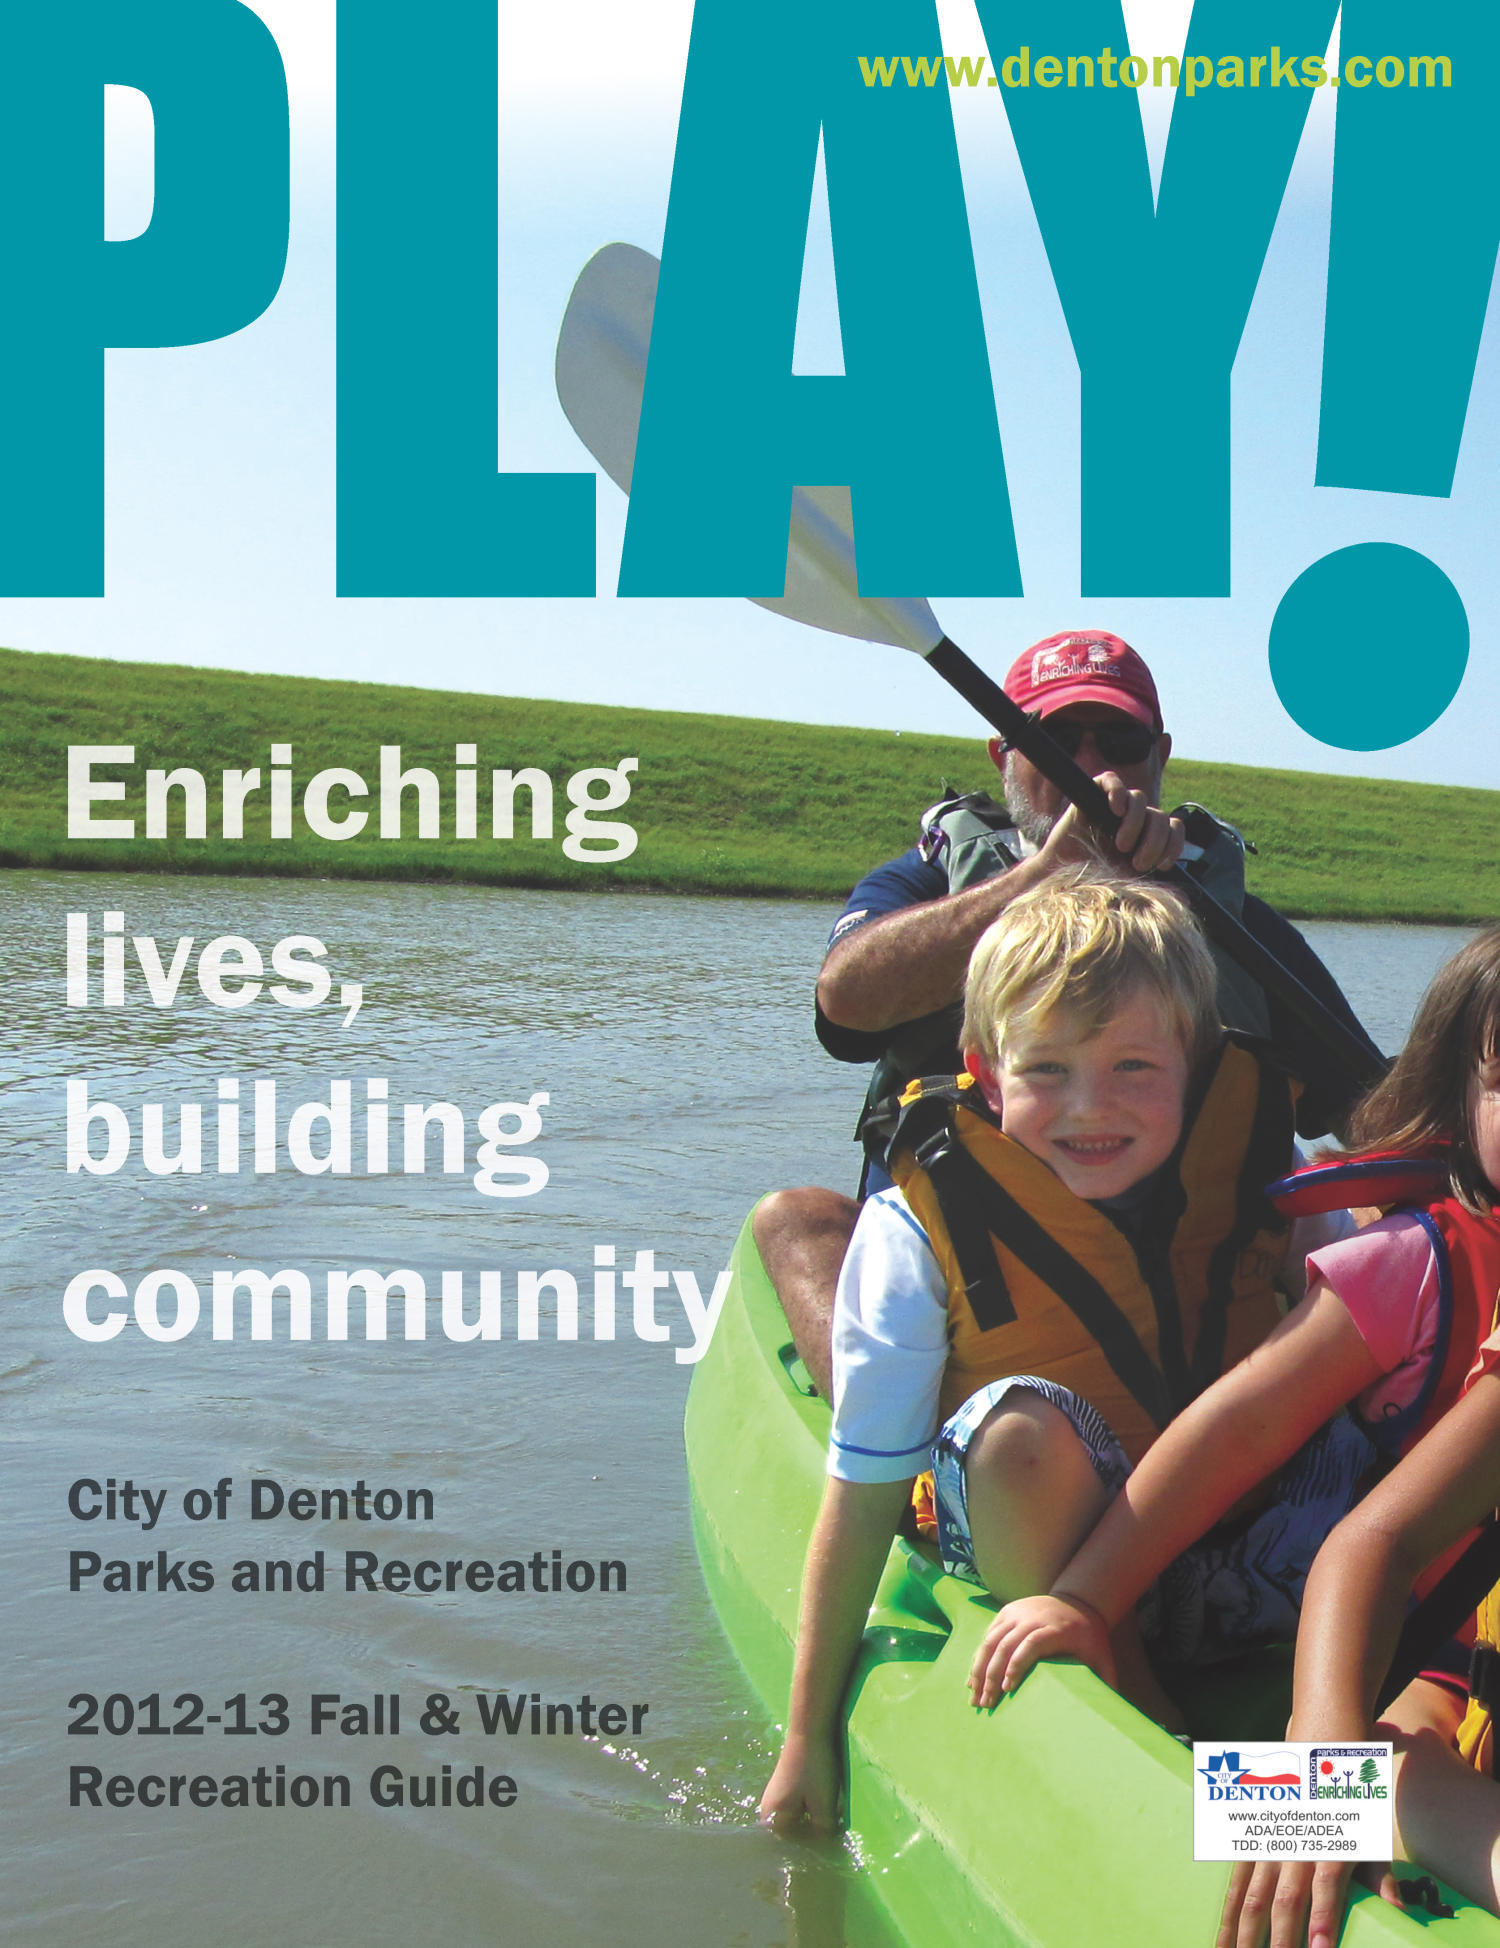 catalog-for-city-of-denton-parks-and-recreation-fall-winter-2012